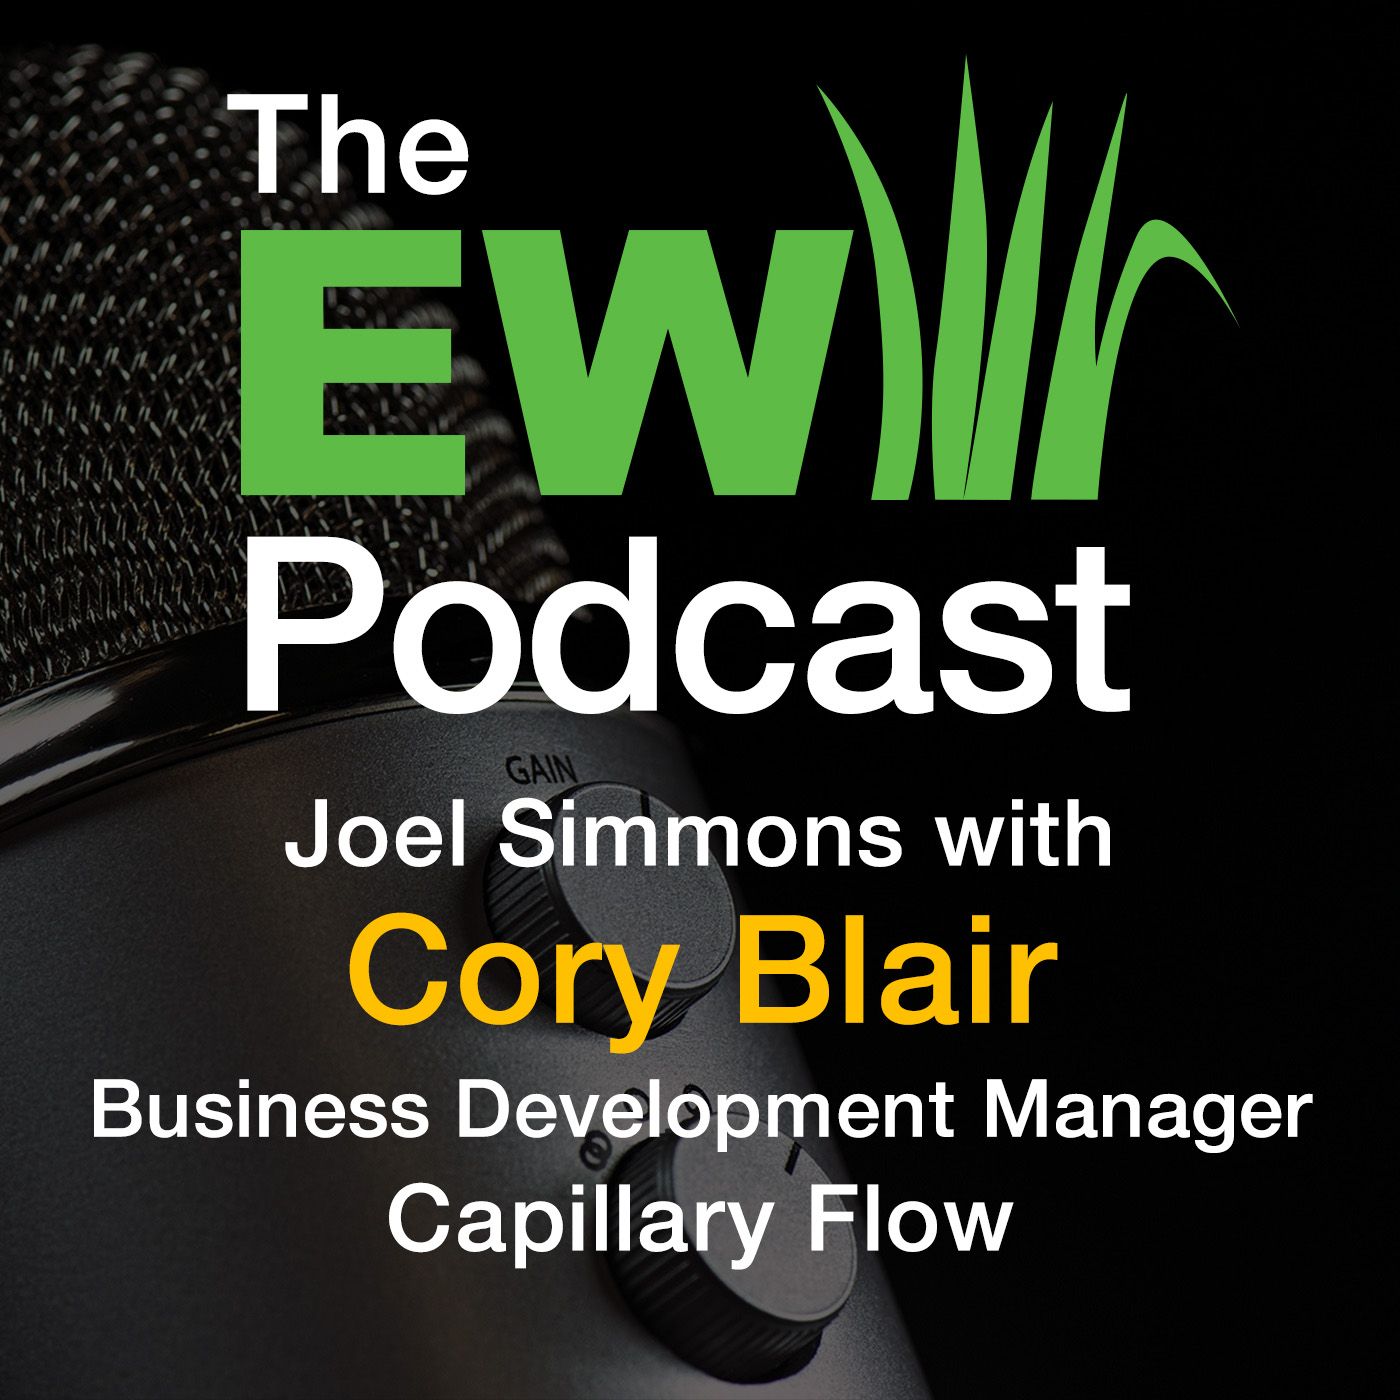 The EW Podcast - Joel Simmons with Cory Blair